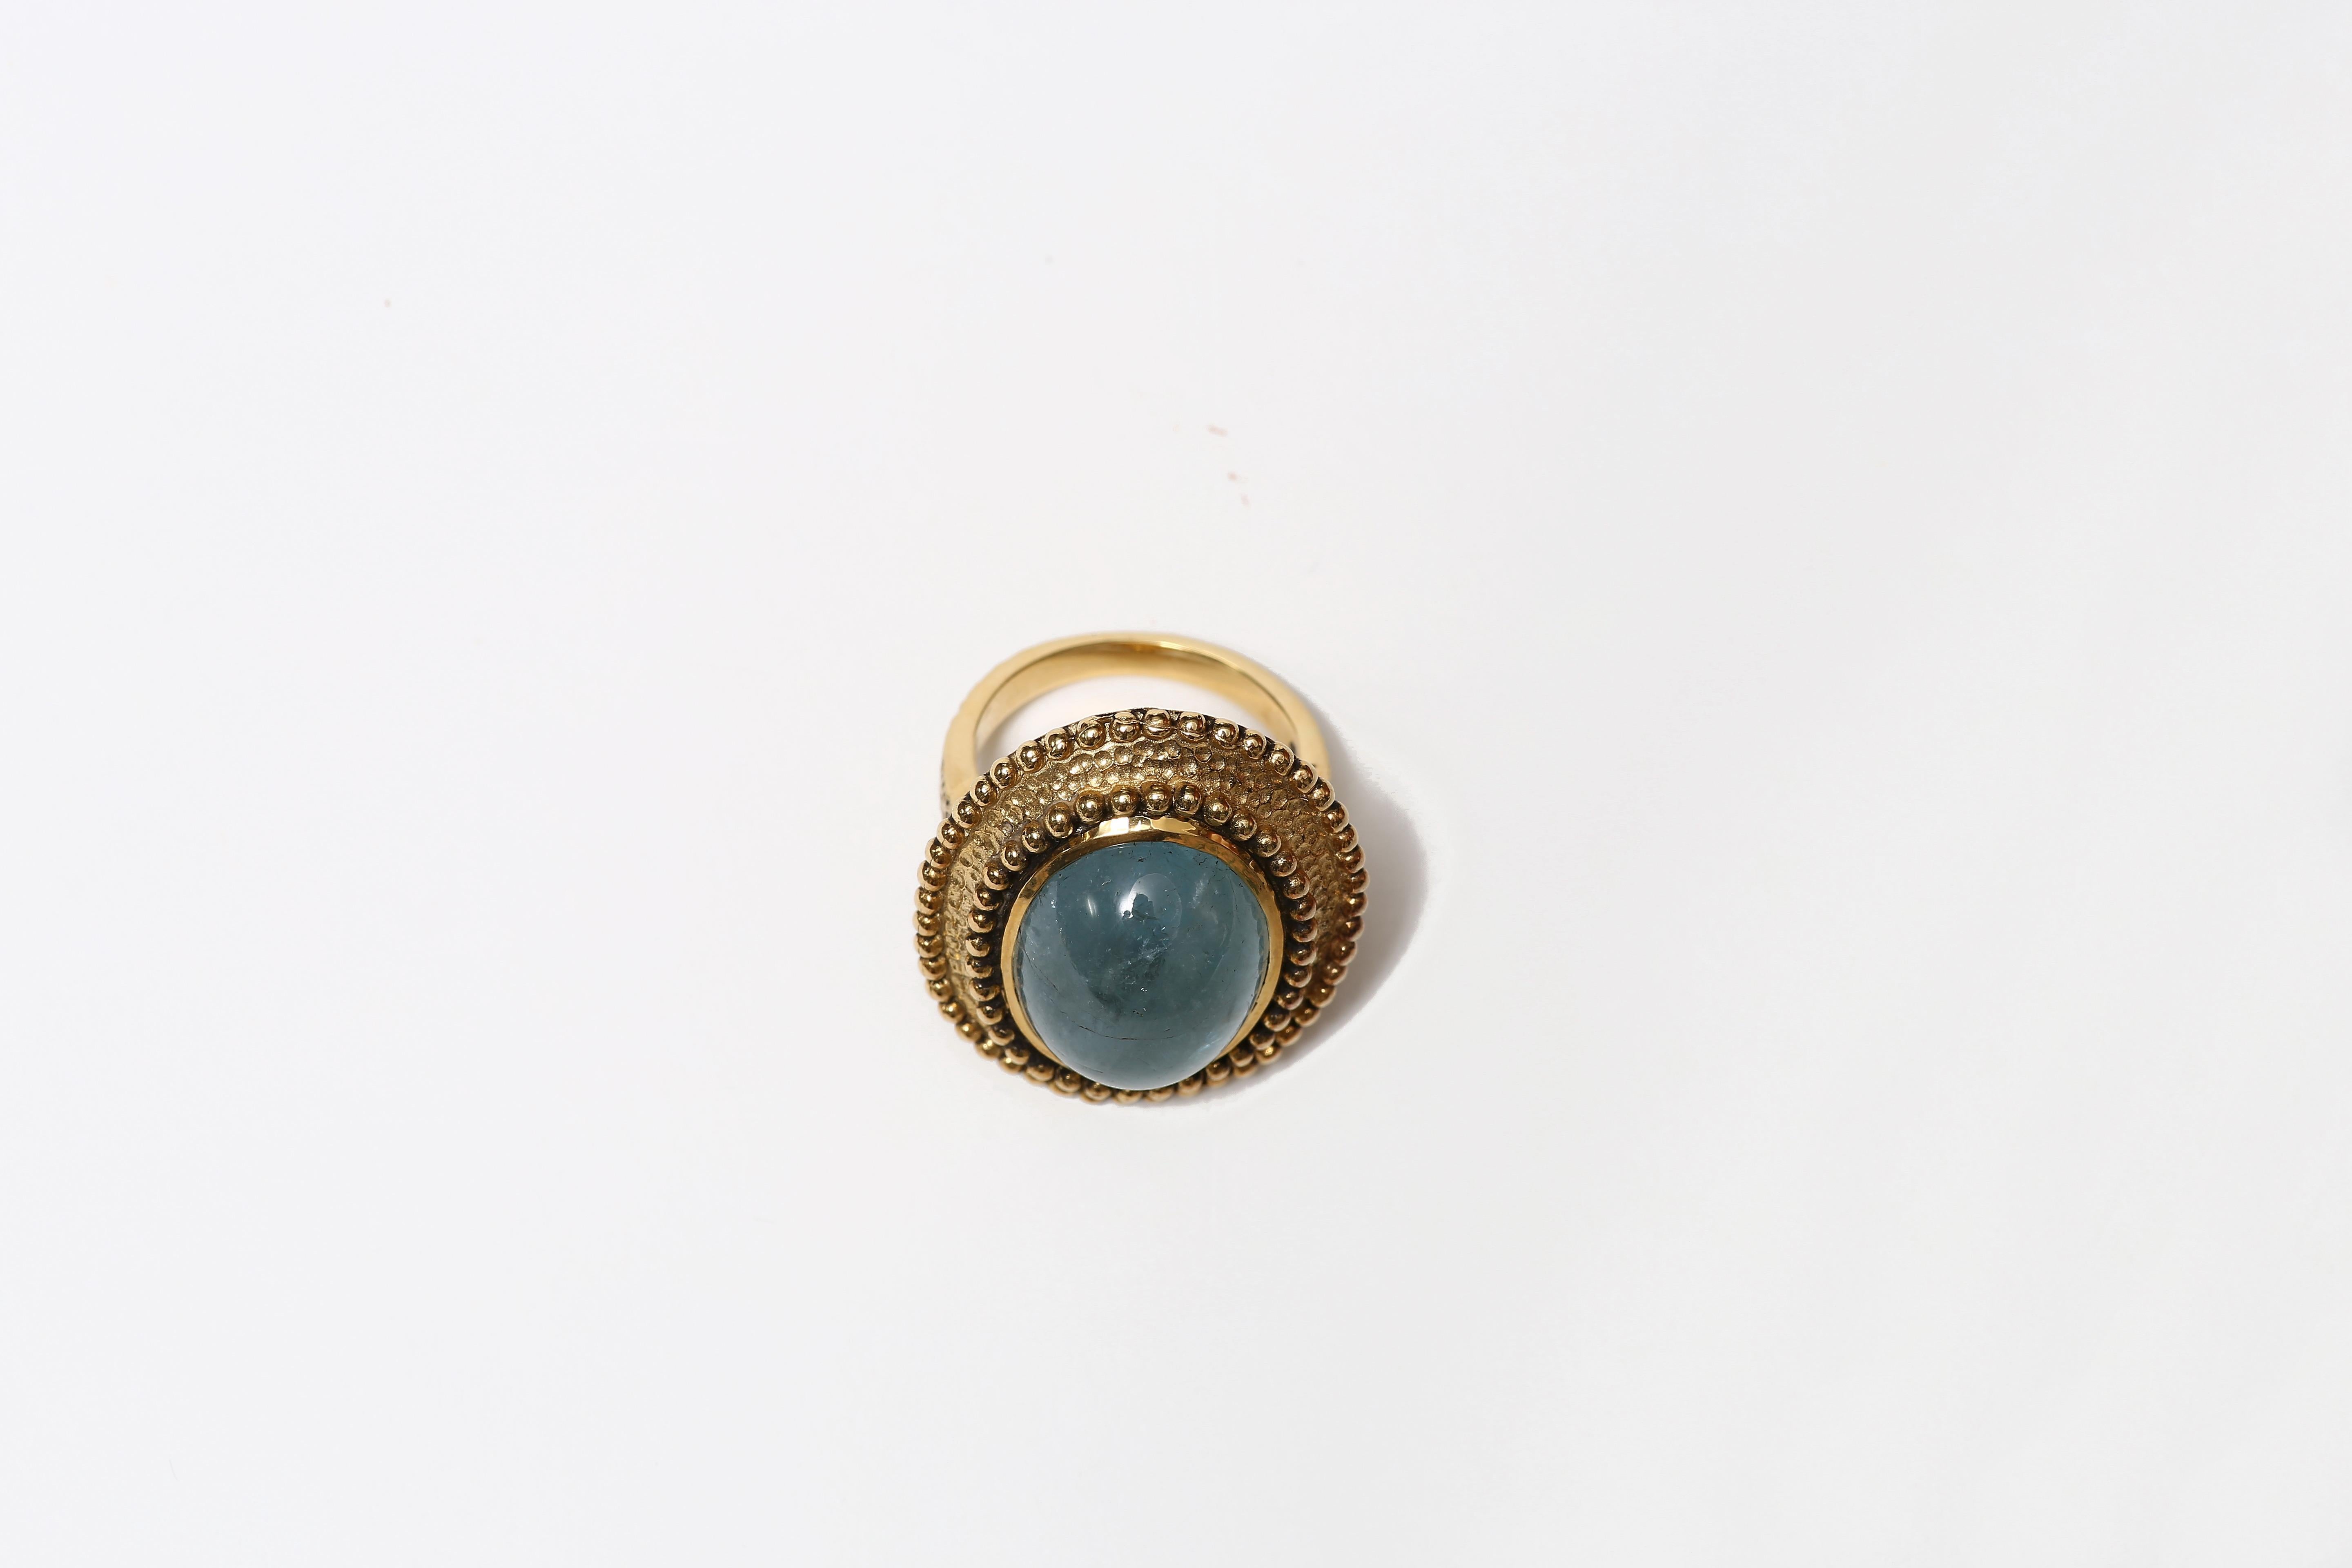 A beautifully handcrafted ring  with oval cabachon aquamarine set in 18 karat gold frame with decorative beaded edges.
US size: 7.75
Interior: 1.6cm dia 

Designed by AMANDA CLARK for Altfield, our collection focuses on natures most lovely materials